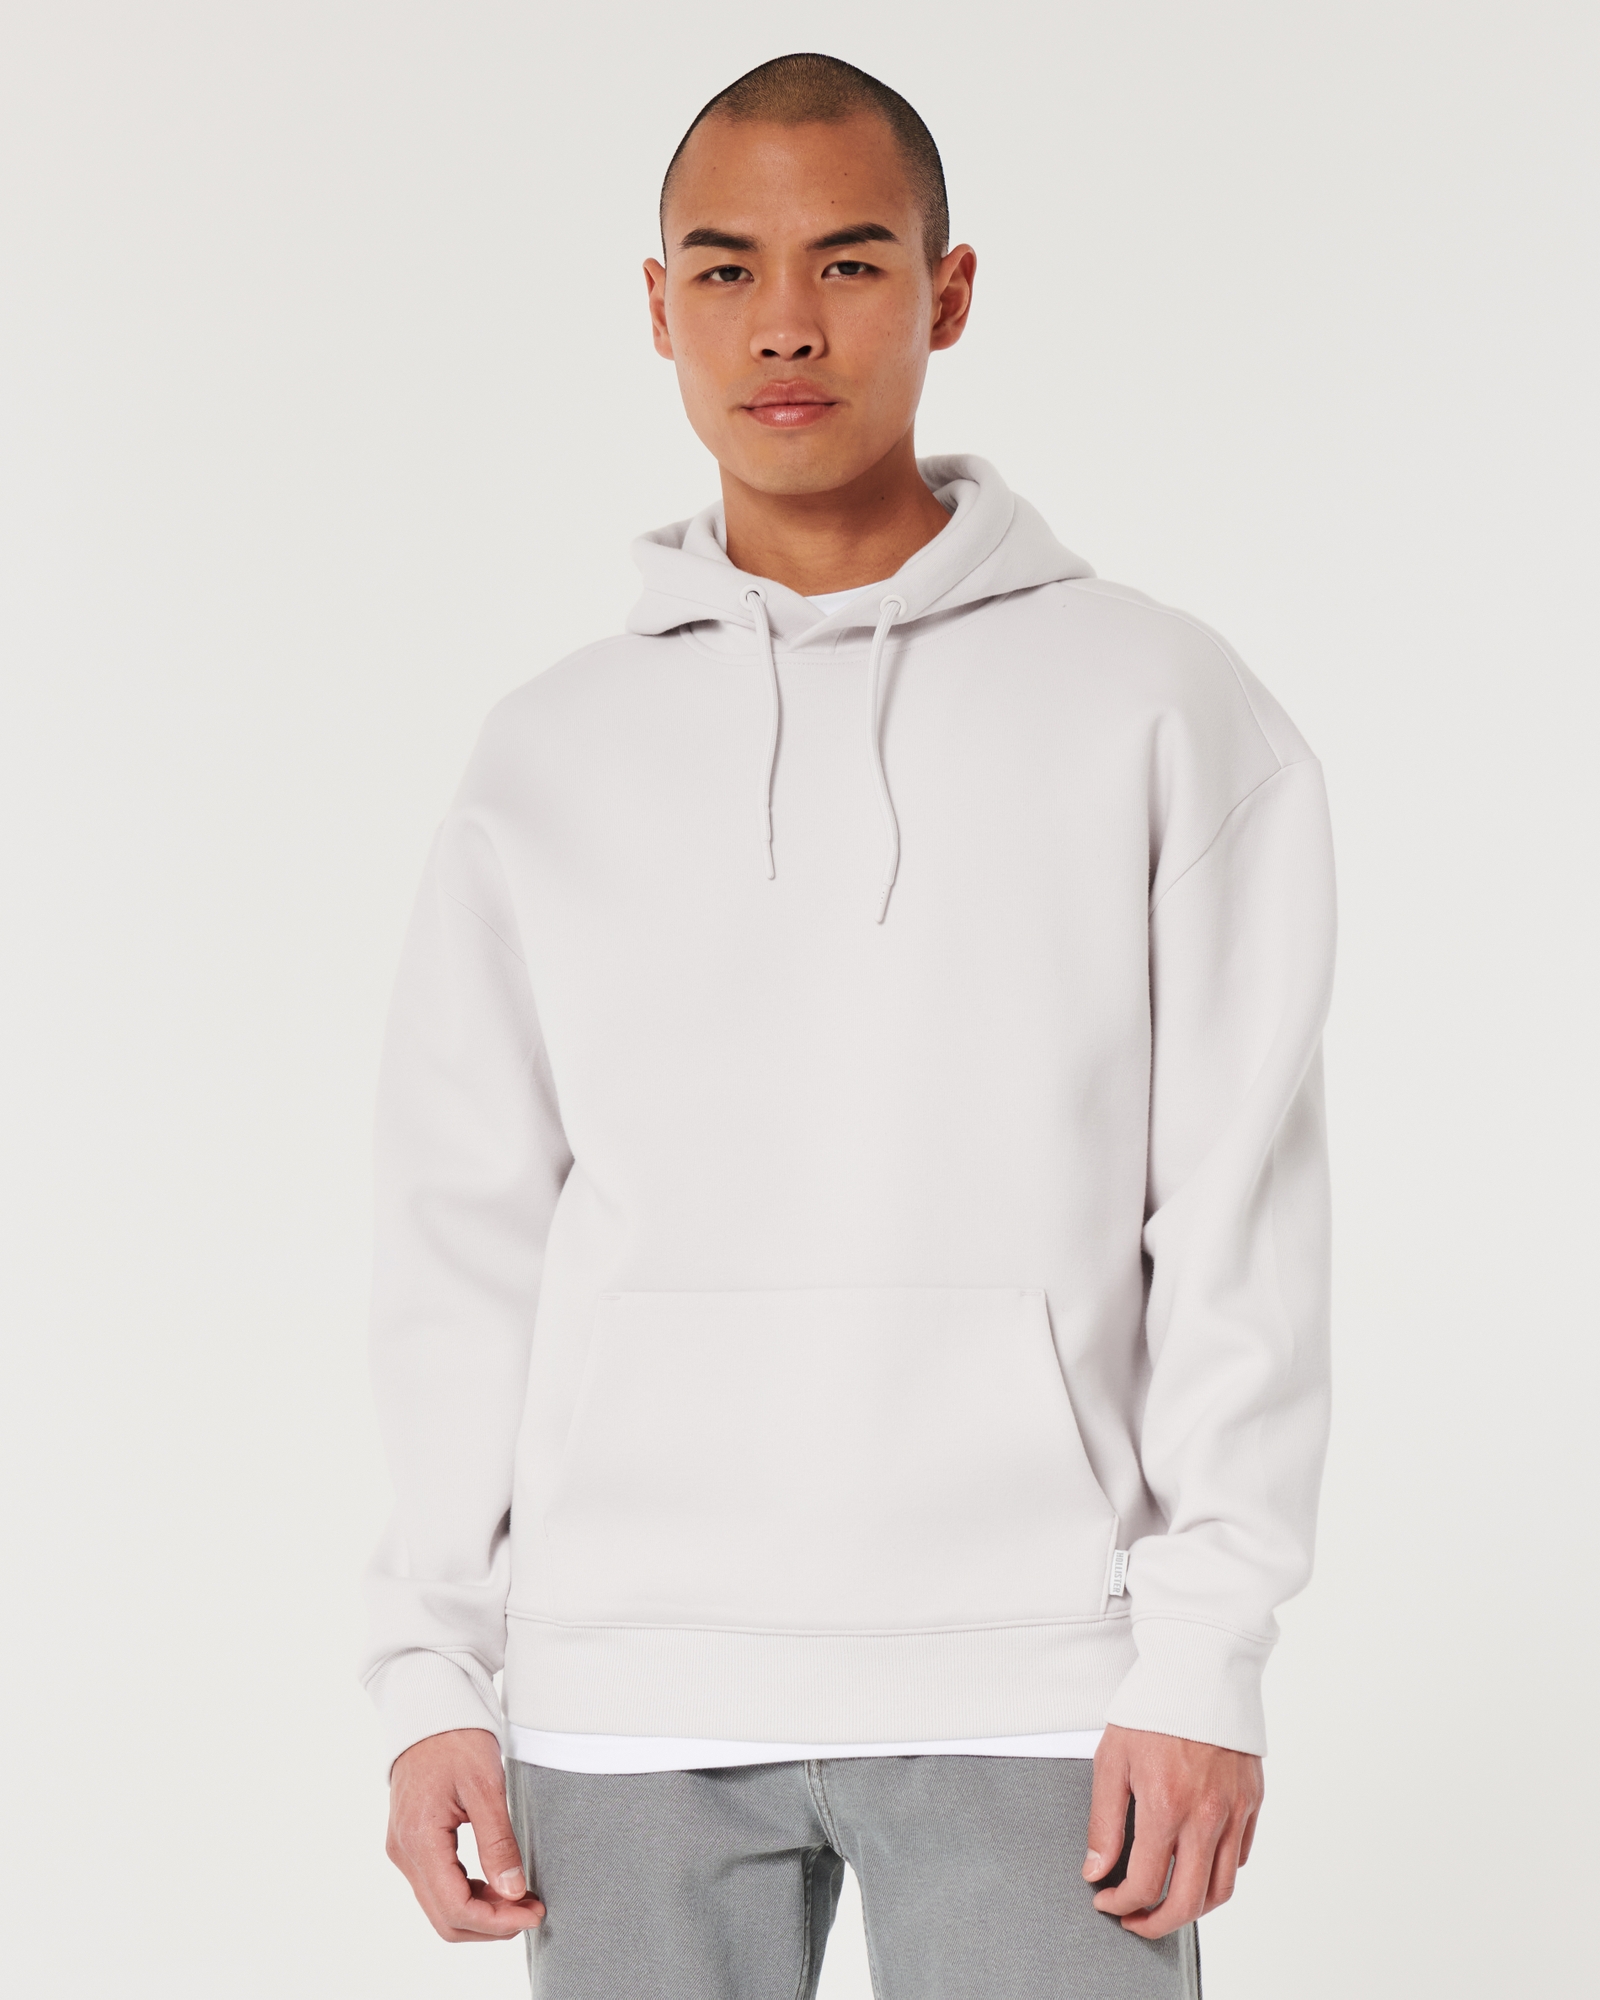 https://img.hollisterco.com/is/image/anf/KIC_322-4082-0065-630_model1.jpg?policy=product-extra-large